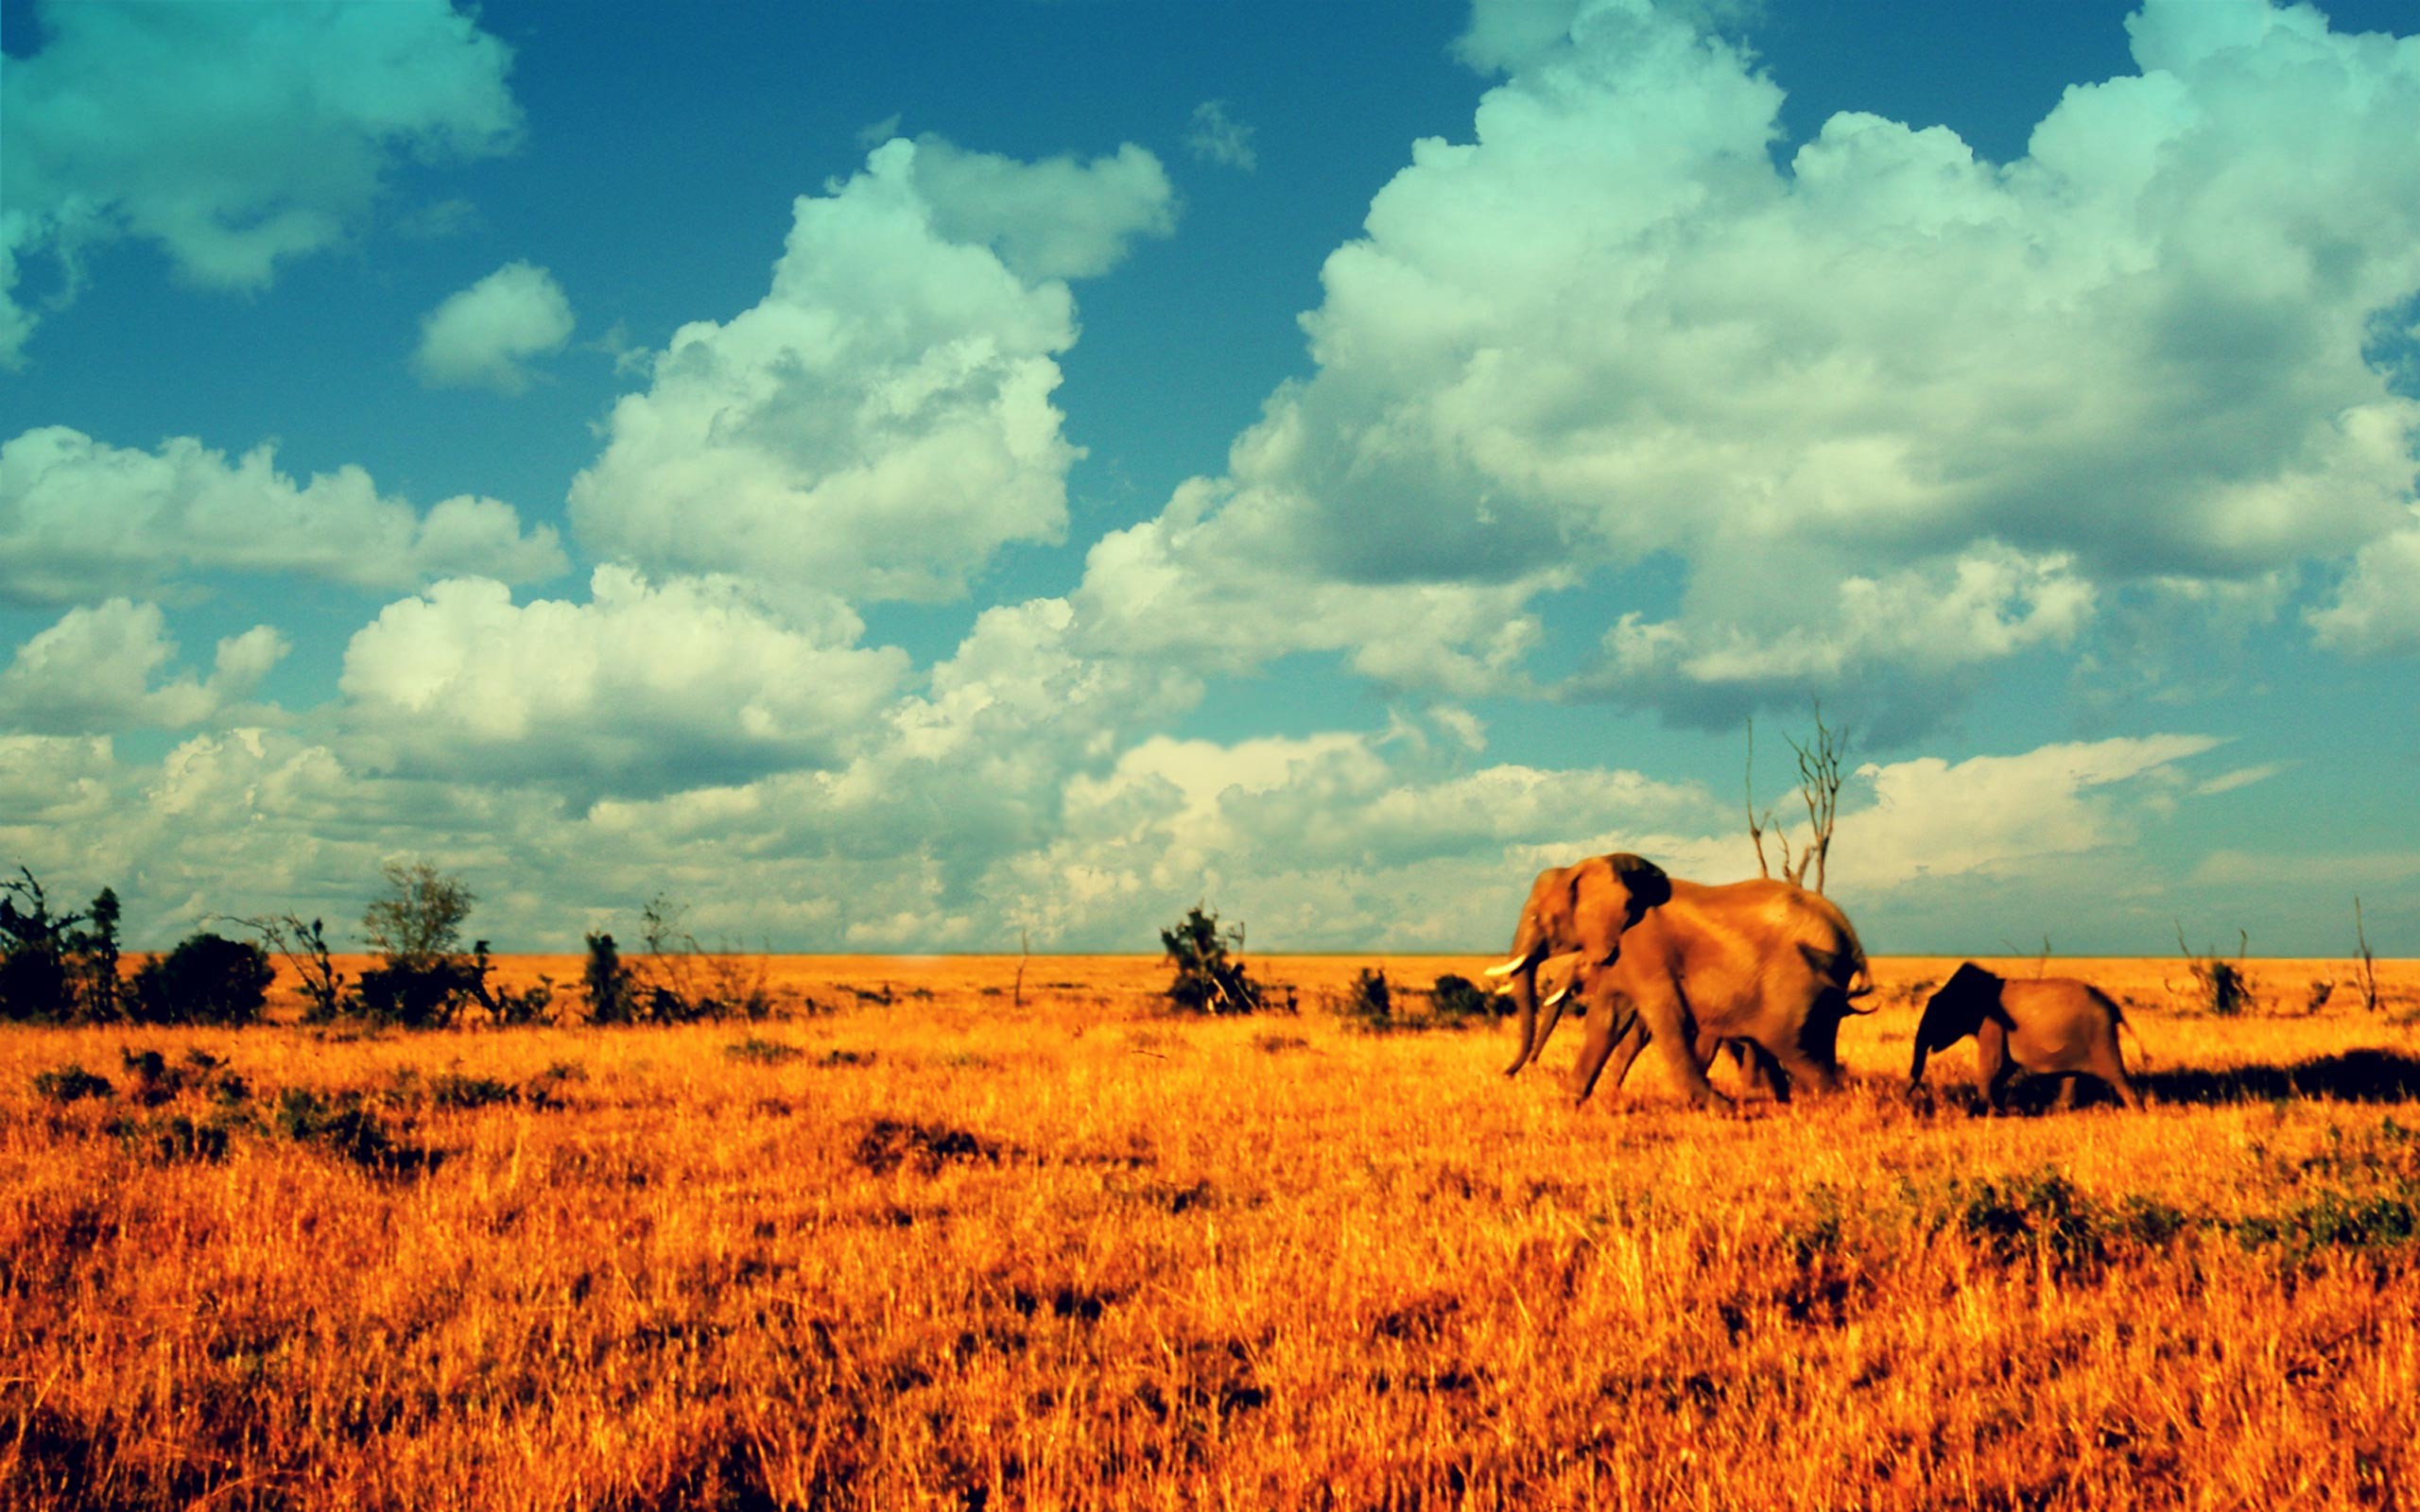 Elephants in the savanna wallpapers and images 